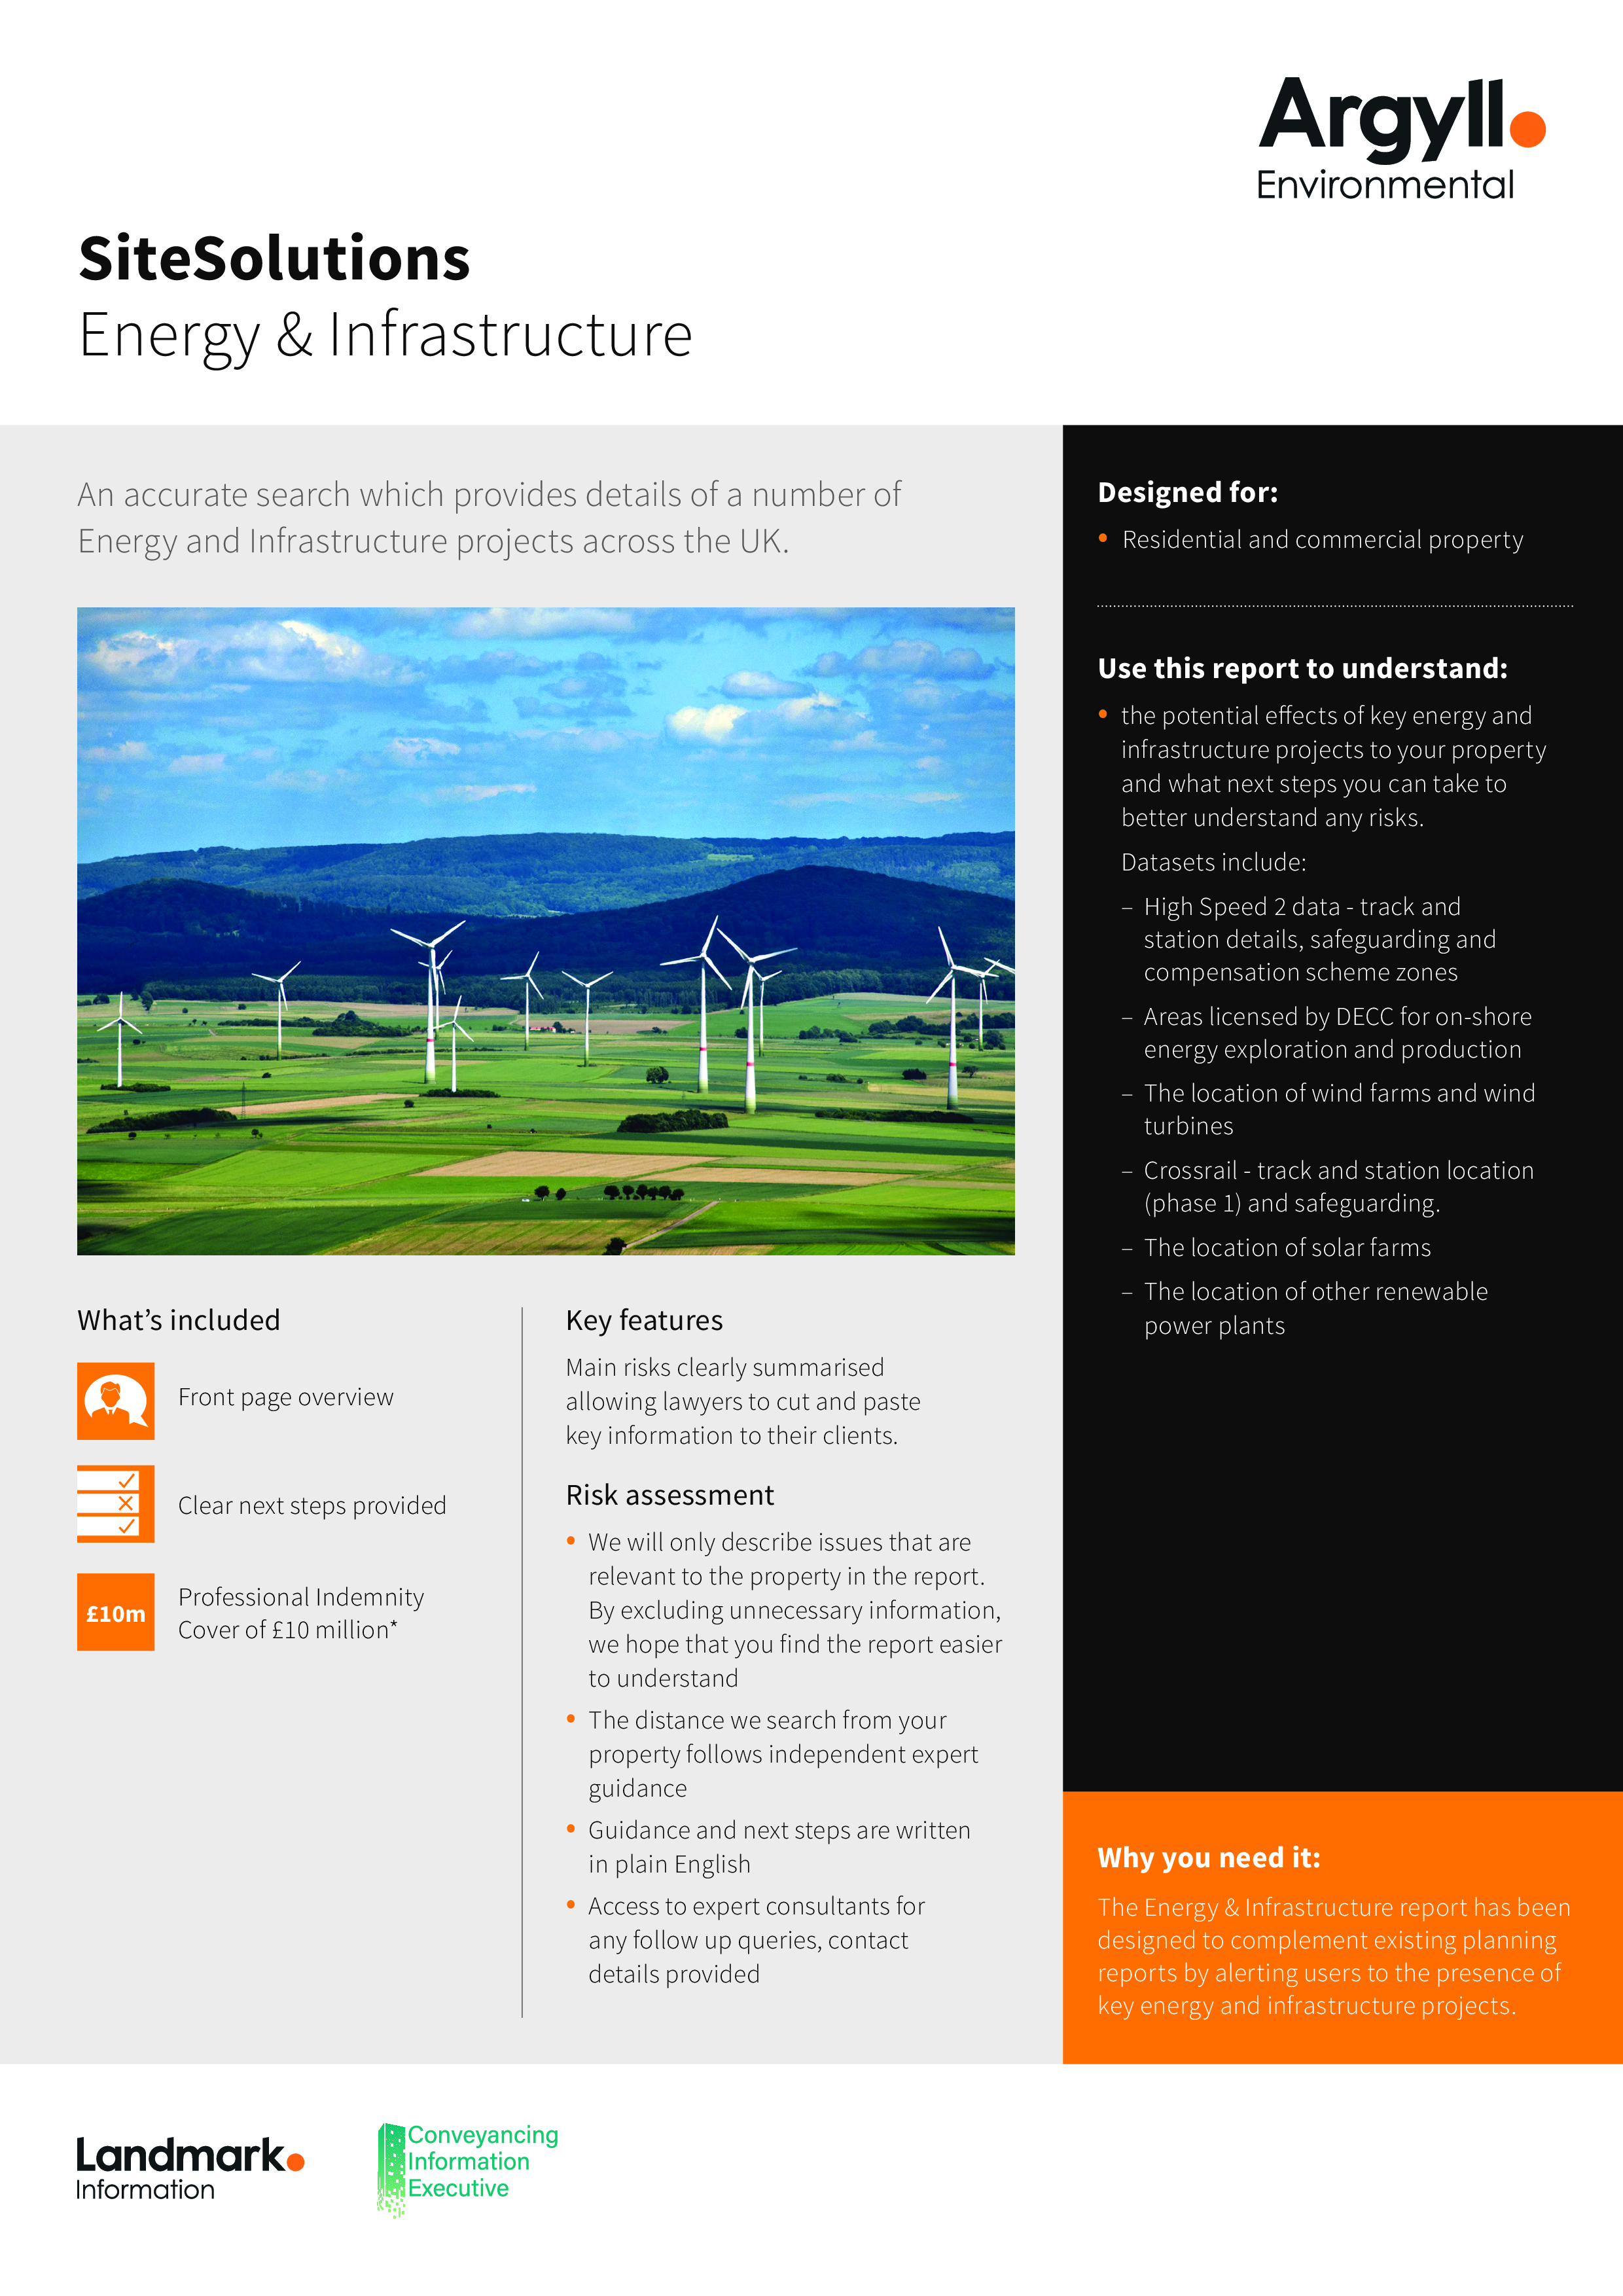 Argyll SiteSolutions Energy and Infrastructure Image